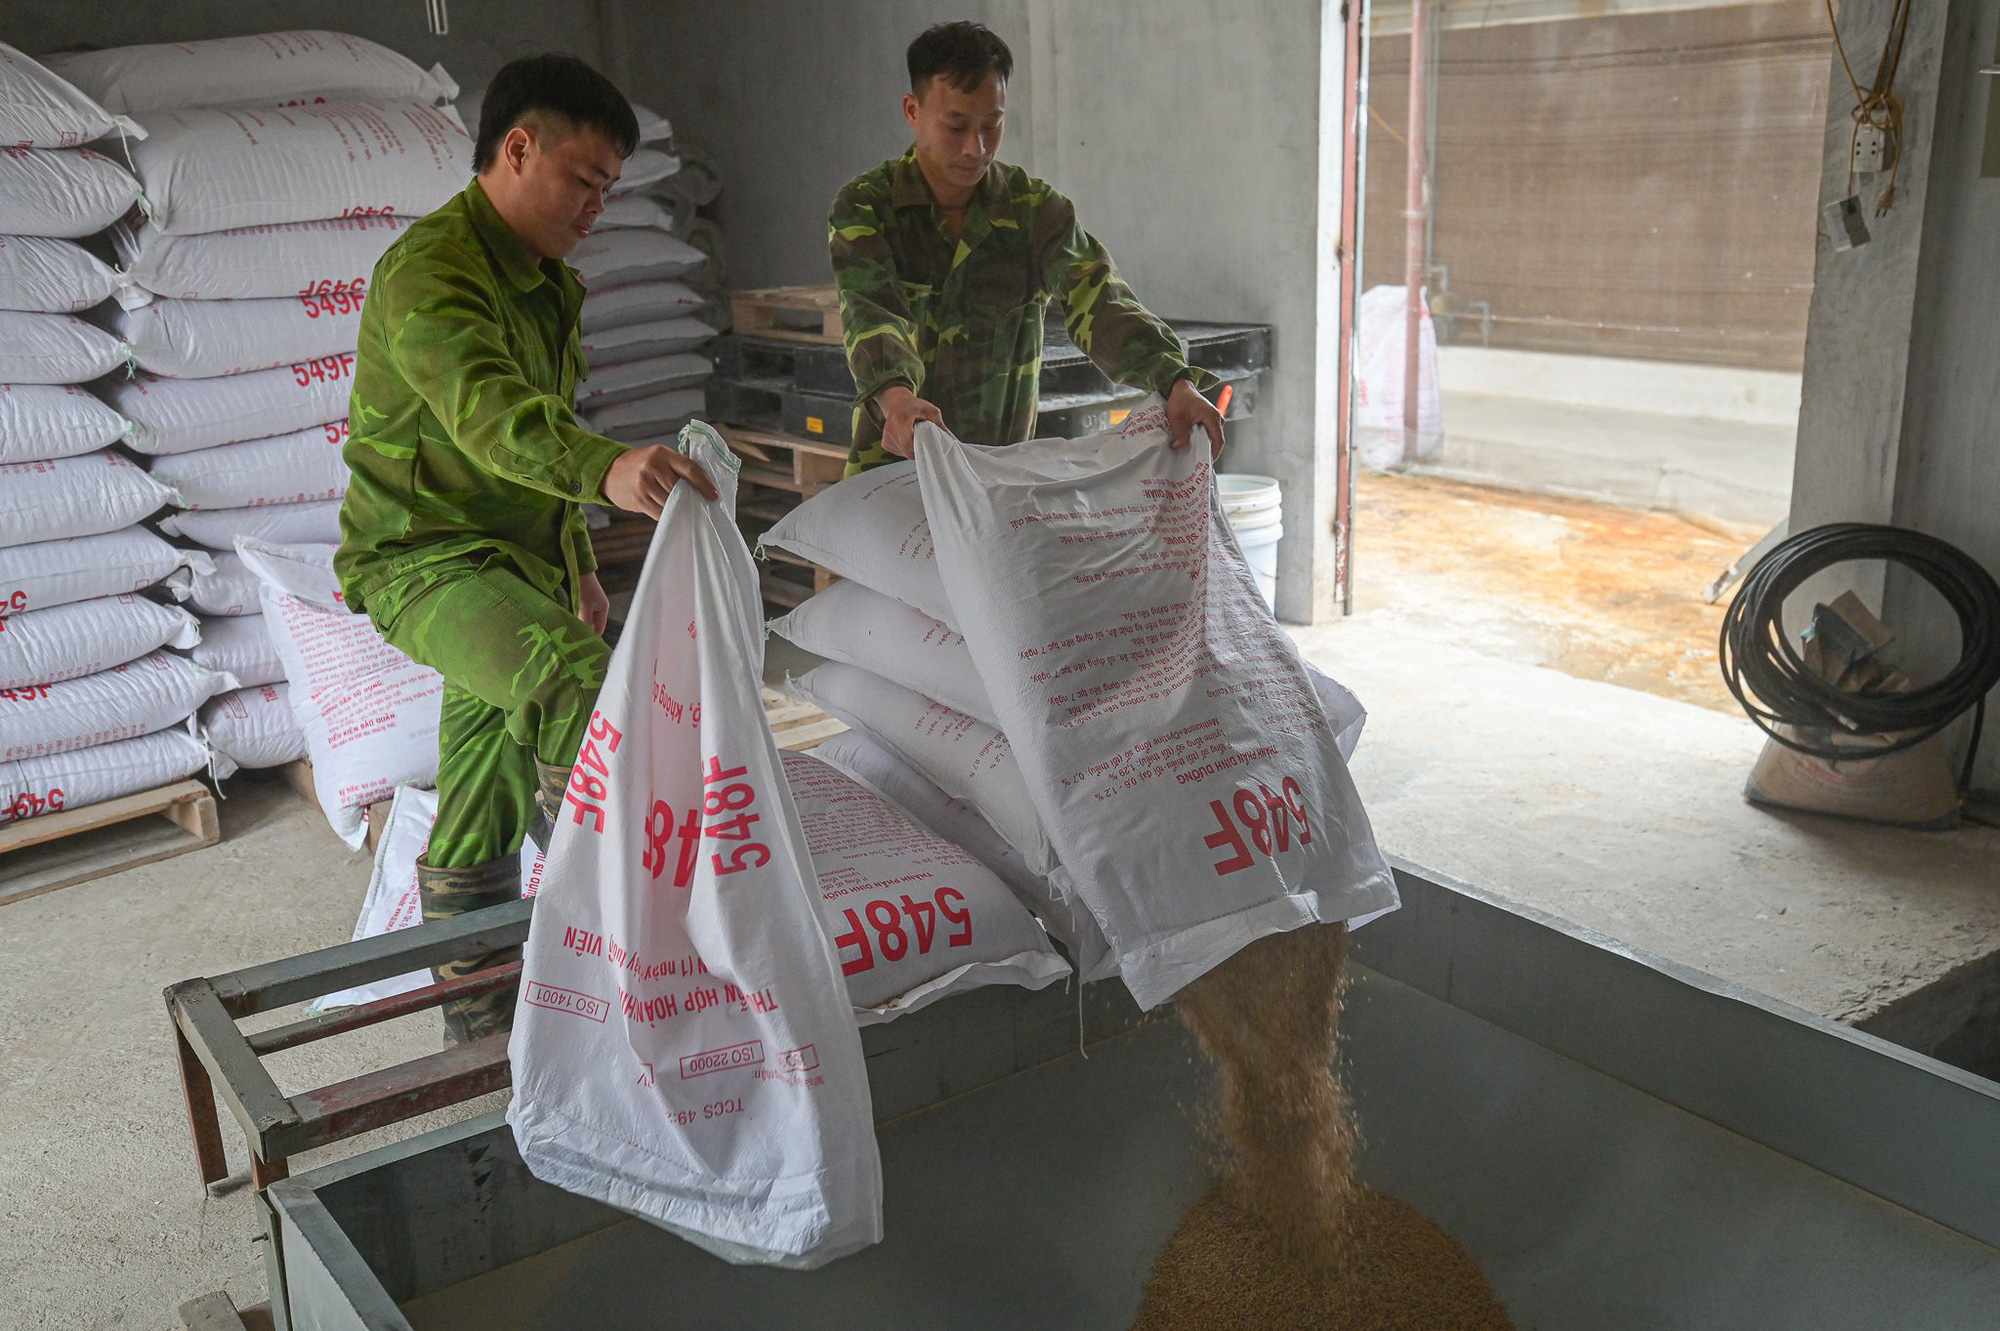 Workers pour rice bran into an automatic system, from which machines will deliver the food to each trough, allowing the ducks to enjoy their meal while listening to music. Photo: Ha Quan / Tuoi Tre